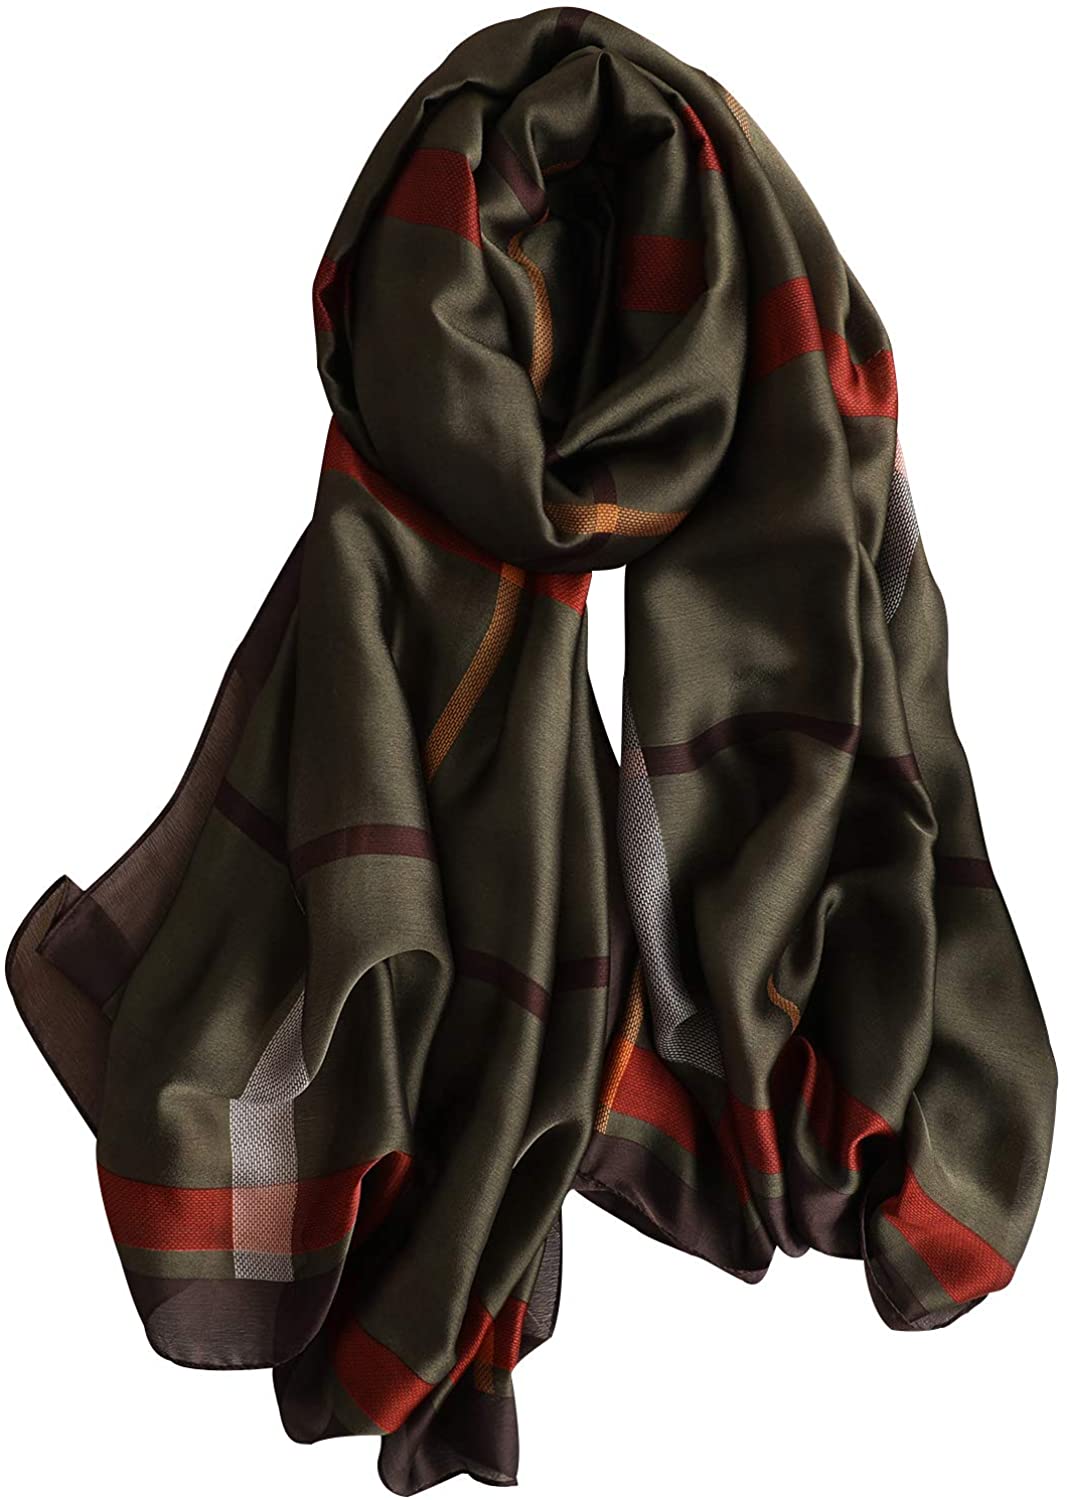 Cuddle Dreams Women's Silk Scarves for Winter, 100% Mulberry Silk Brushed, Luxuriously Soft & Warm, Decent Box Packed